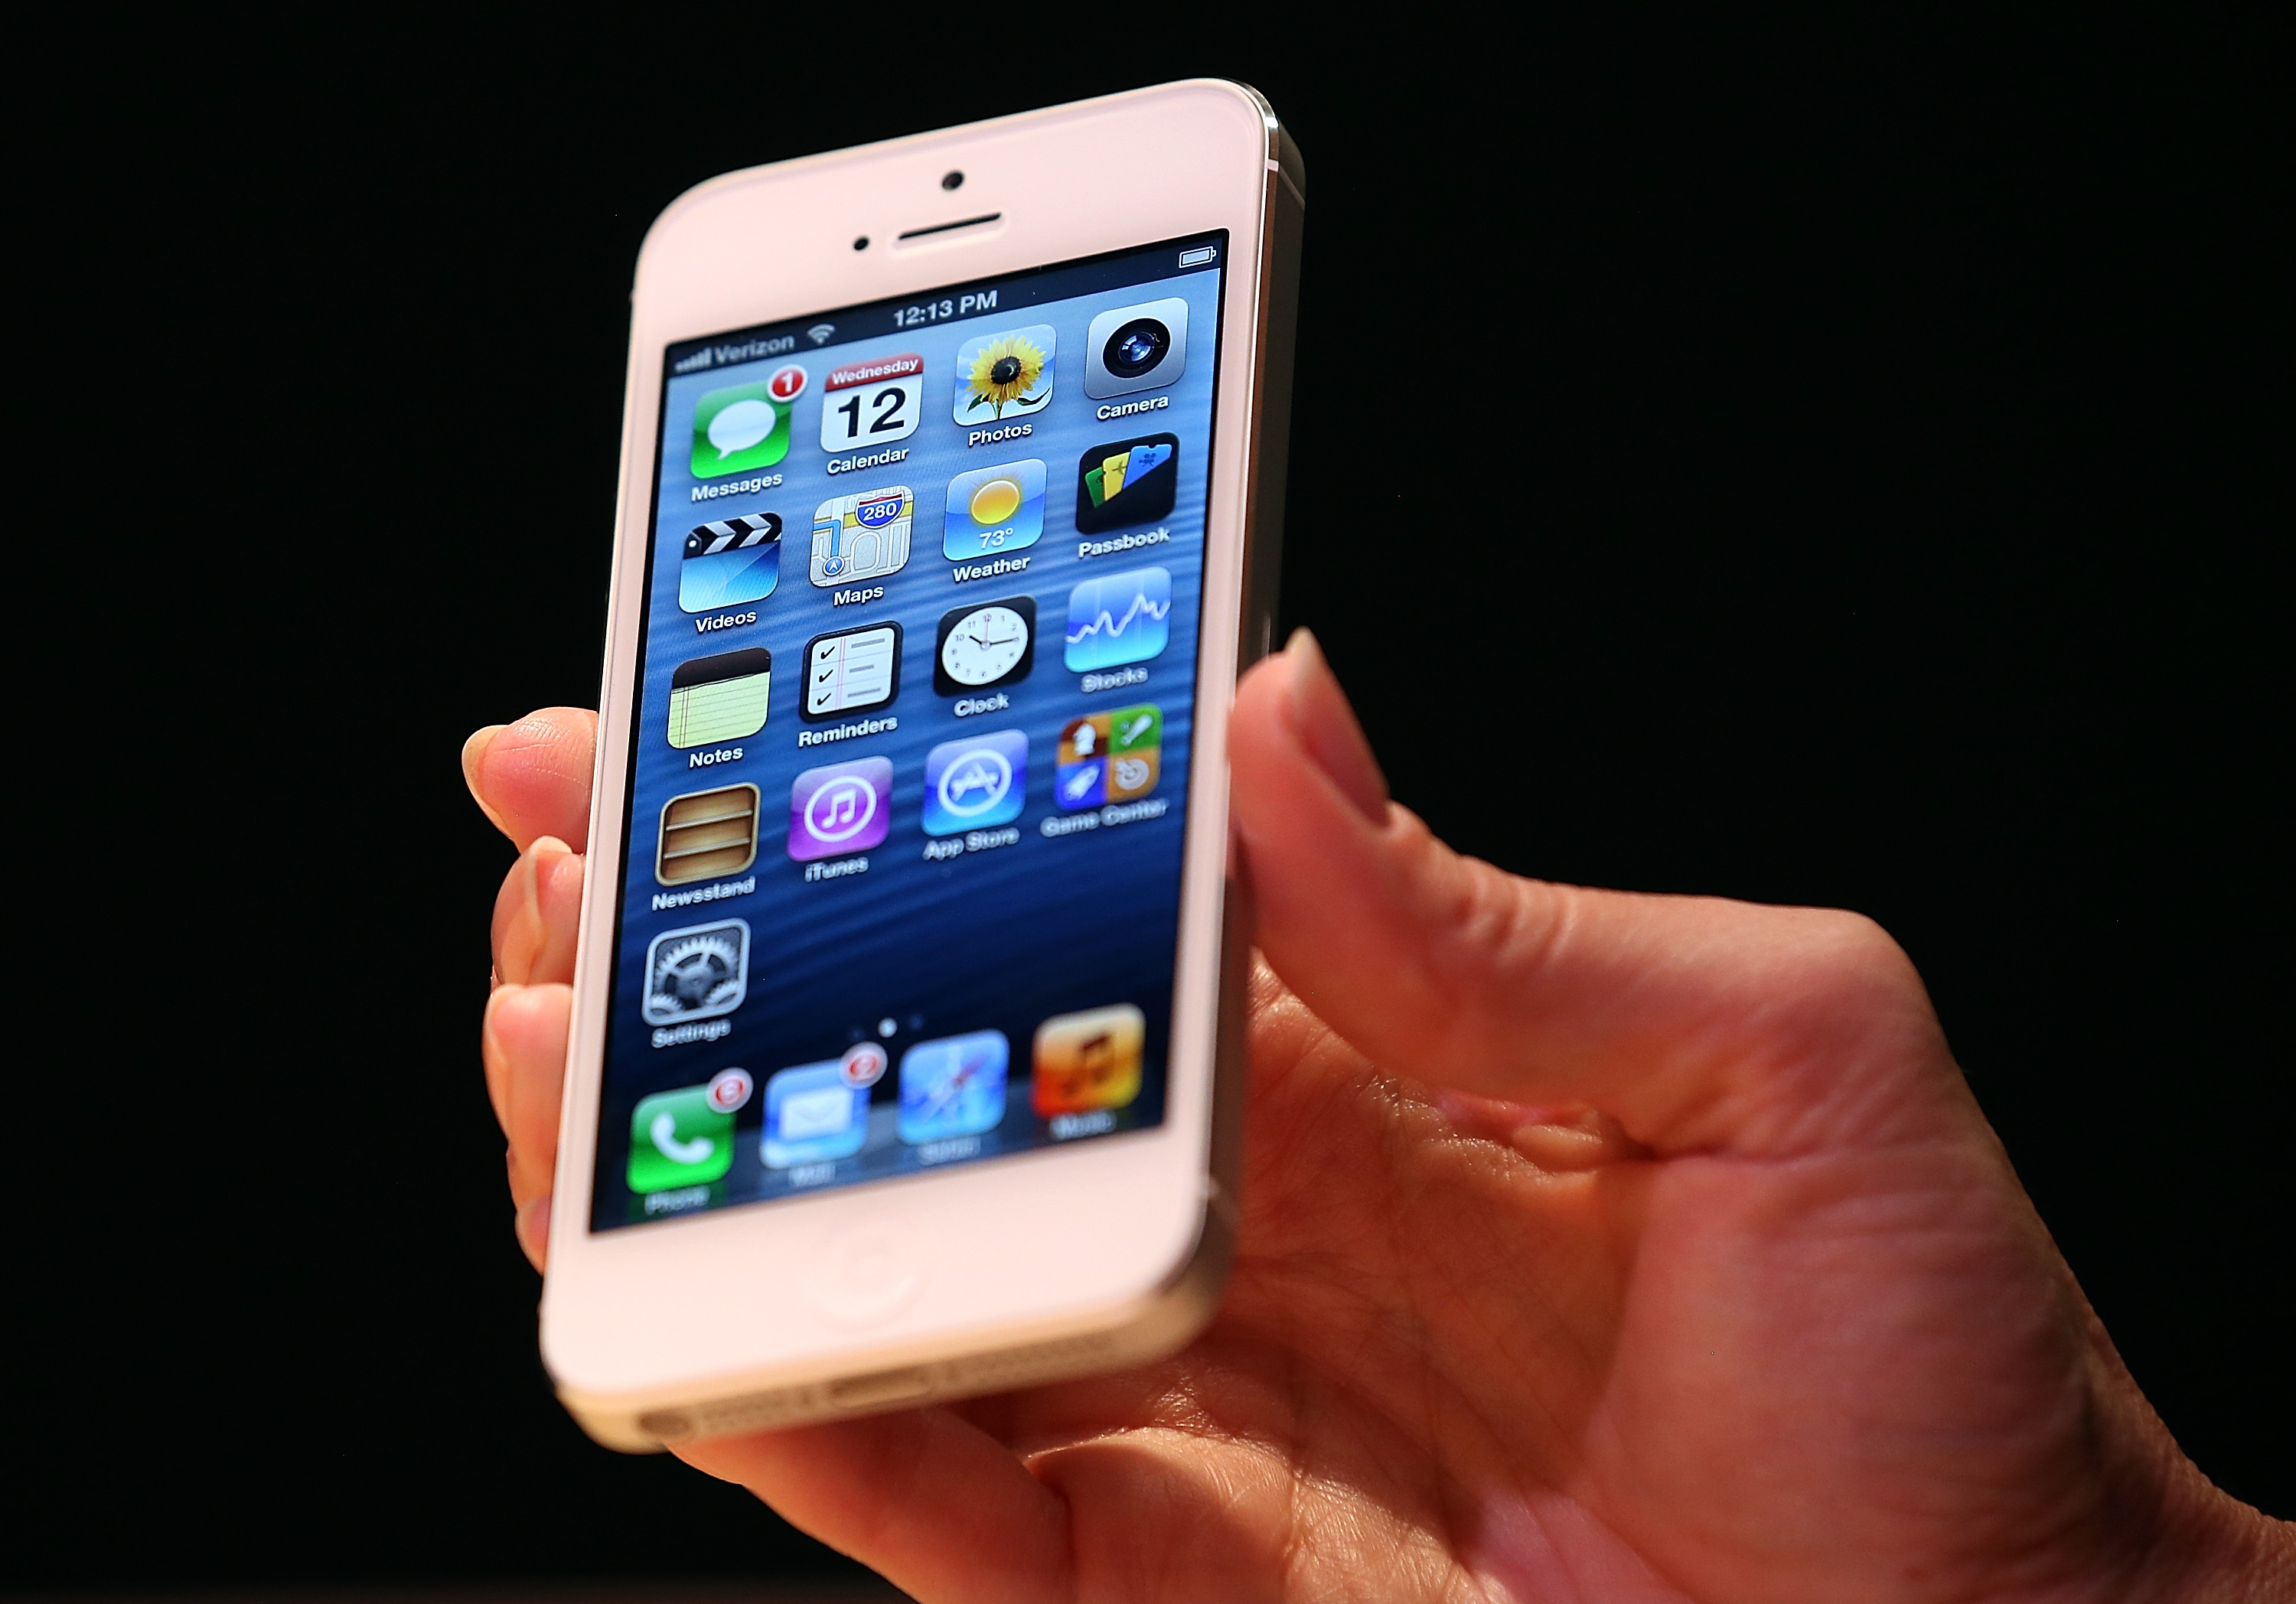 The new iPhone 5 is displayed during an Apple special event at the Yerba Buena Center for the Arts on September 12, 2012 in San Francisco, California. (Justin Sullivan&amp;mdash;Getty Images)